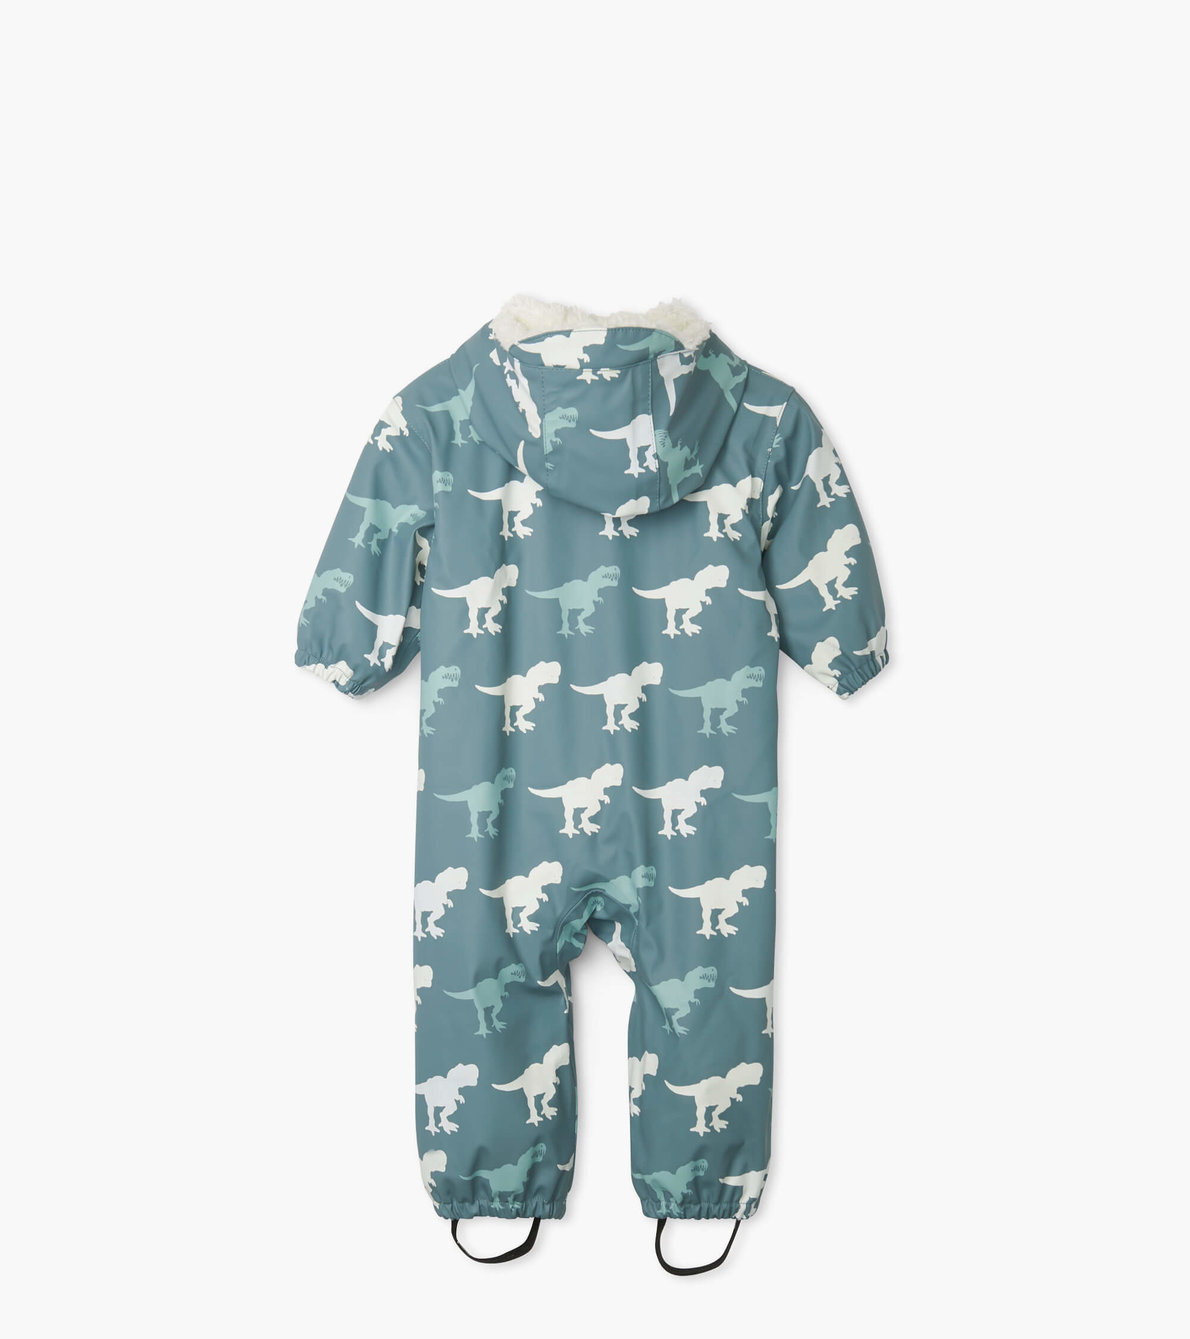 View larger image of T-Rex Sherpa Lined Colour Changing Baby Rain Suit